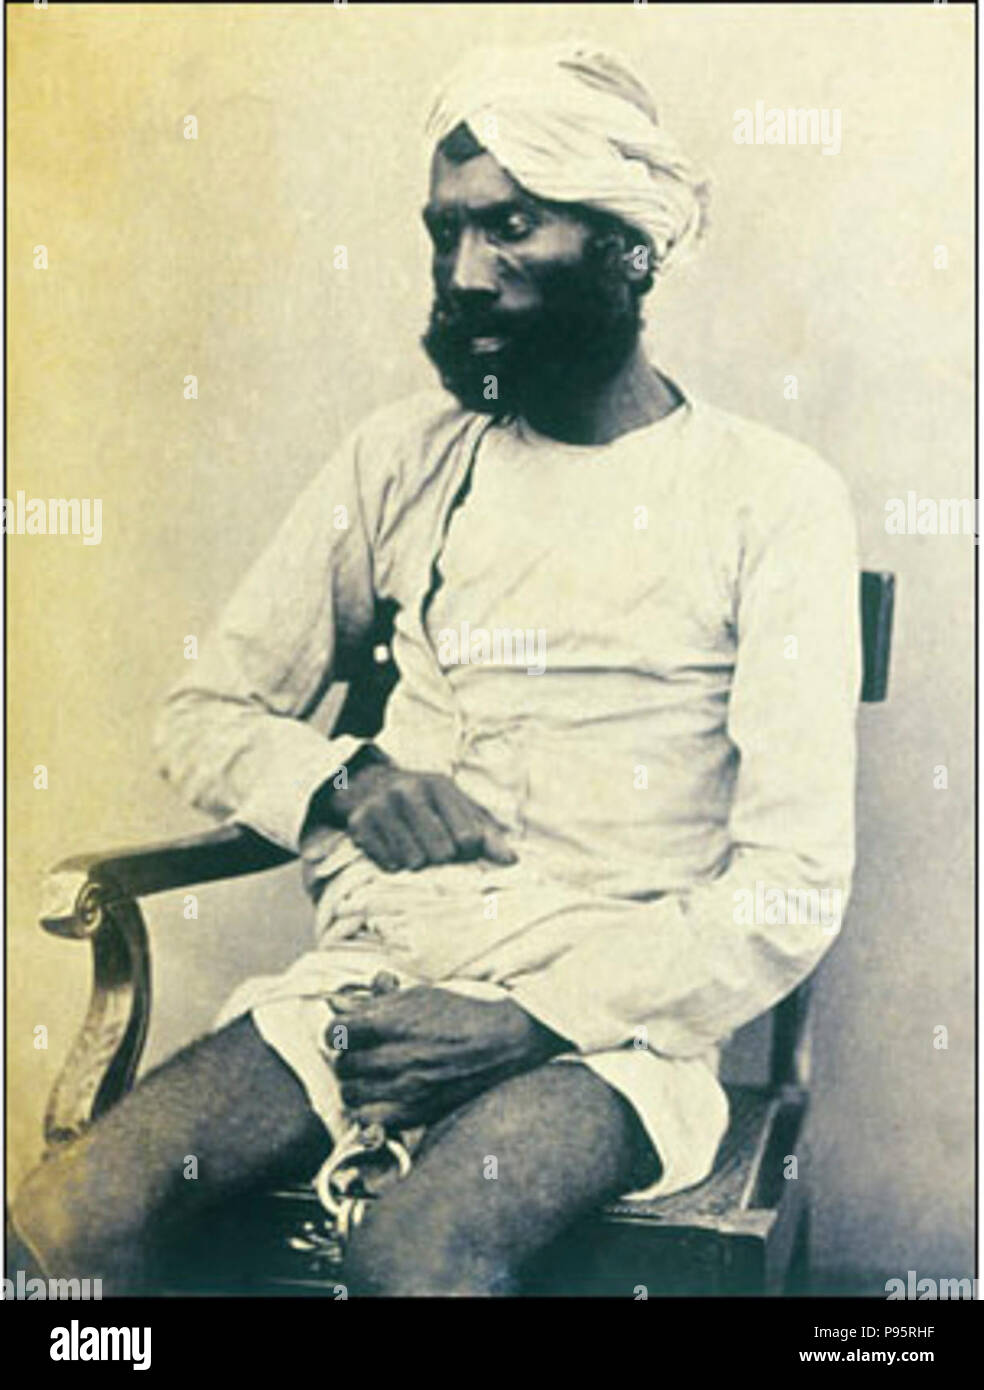 A hand-written caption identifies the man as Gungoo Mehter who was tried at Kanpur for killing many of the Sati Chaura survivors including many women and children. He was convicted and hanged at Kanpur on 8 September 1859. Stock Photo